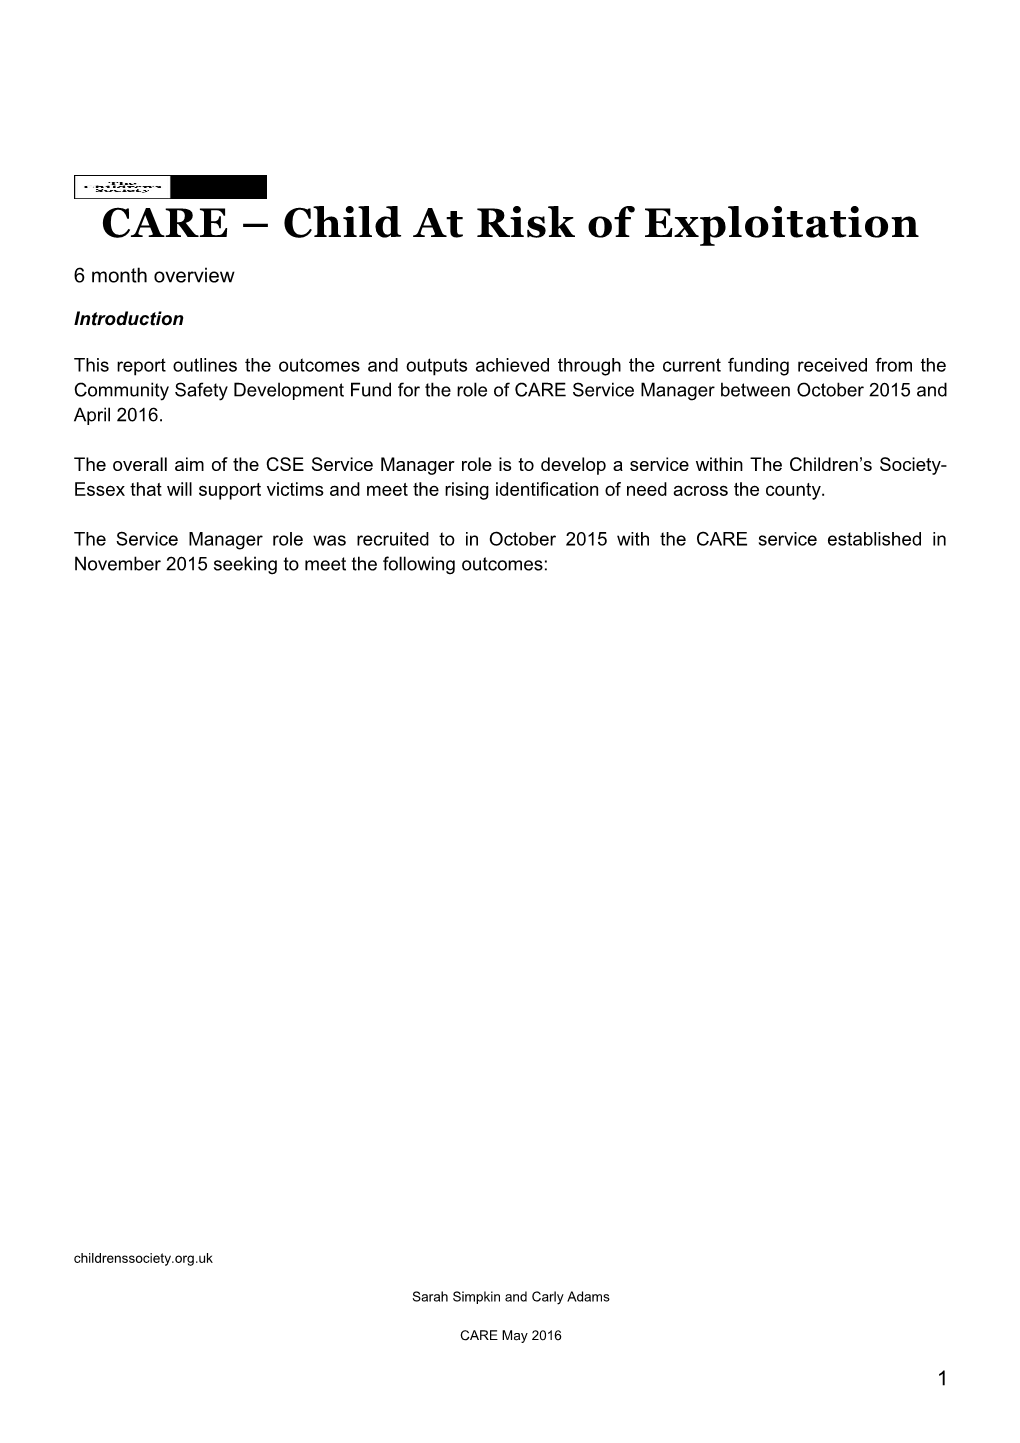 CARE Child at Risk of Exploitation